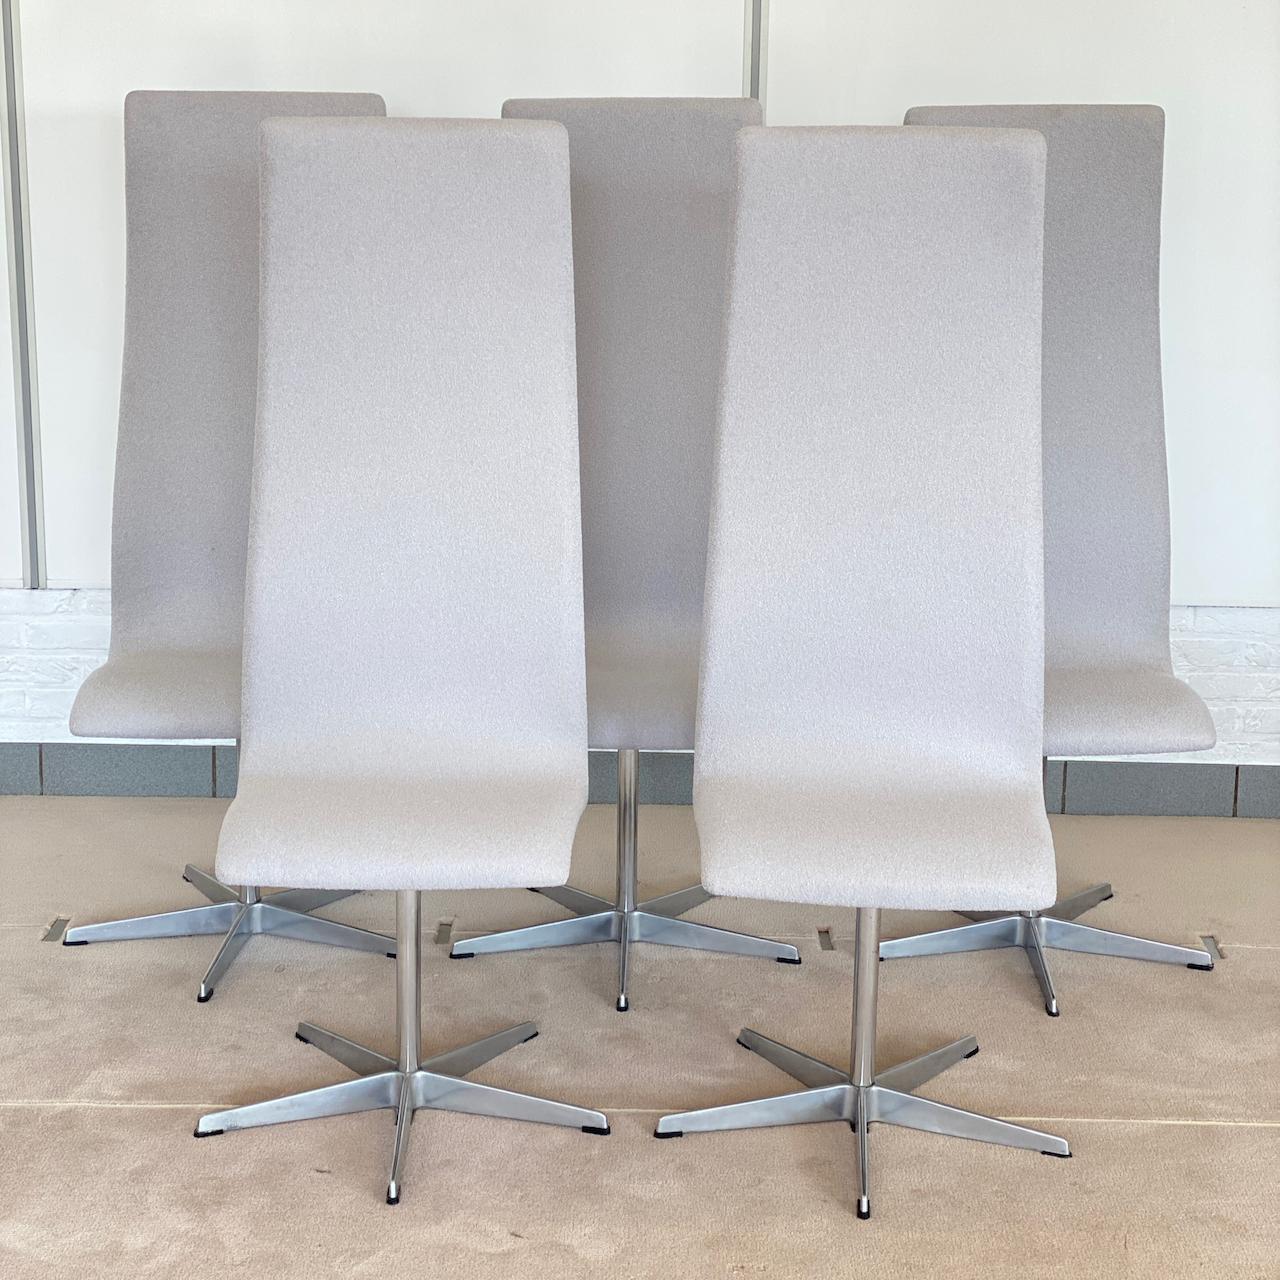 Mid-Century Modern Set of 6 Oxford chairs by Arne Jacobson for Fritz Hansen - Denmark 1960s For Sale